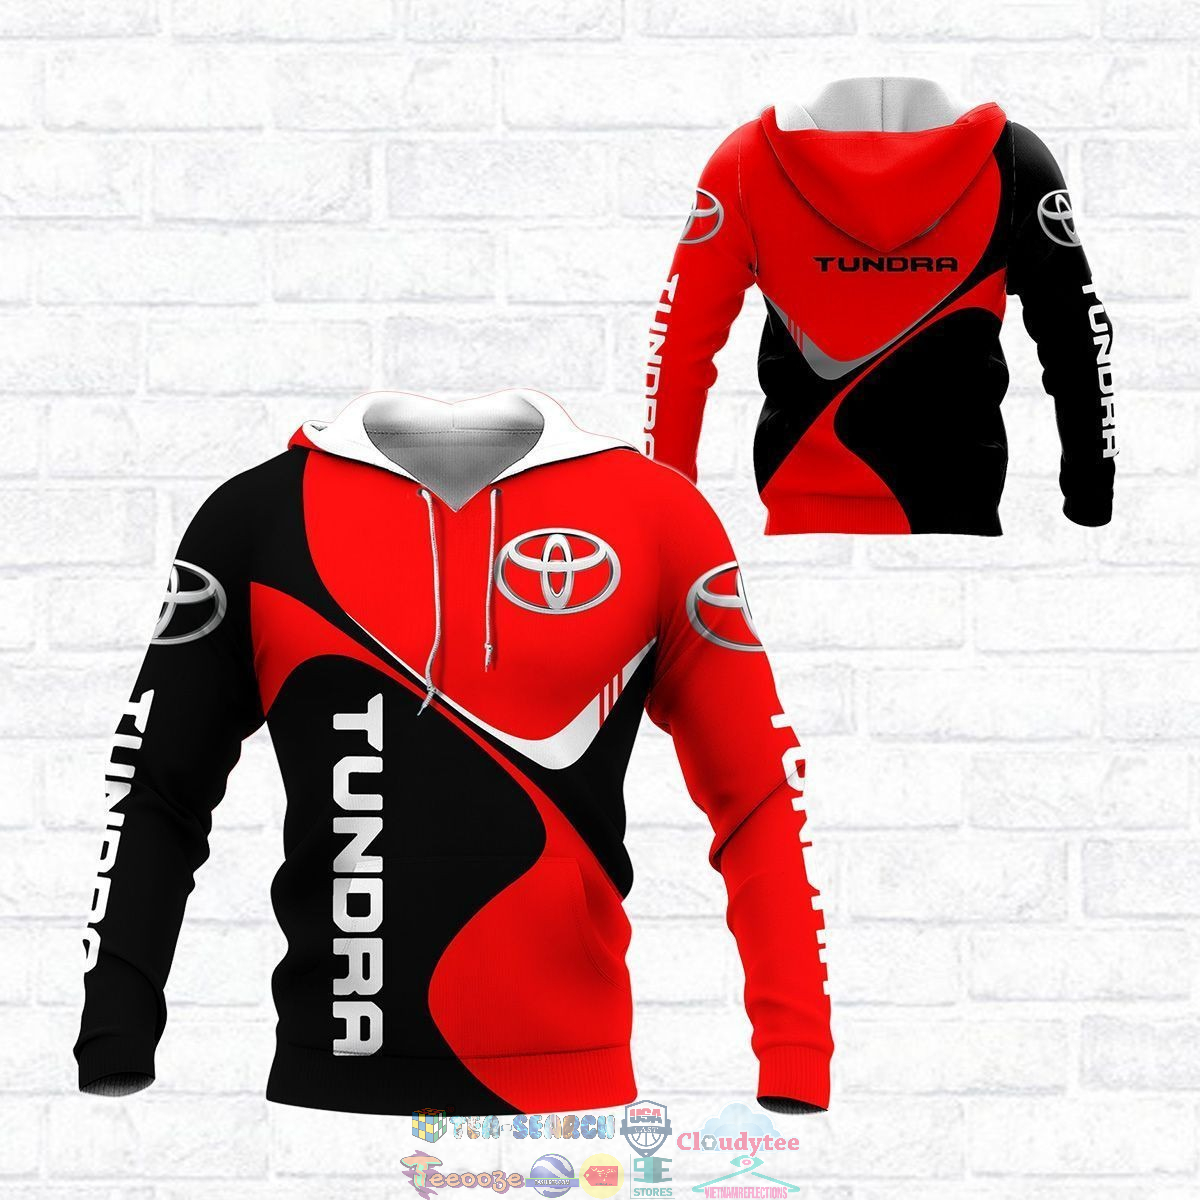 Toyota Tundra ver 7 3D hoodie and t-shirt